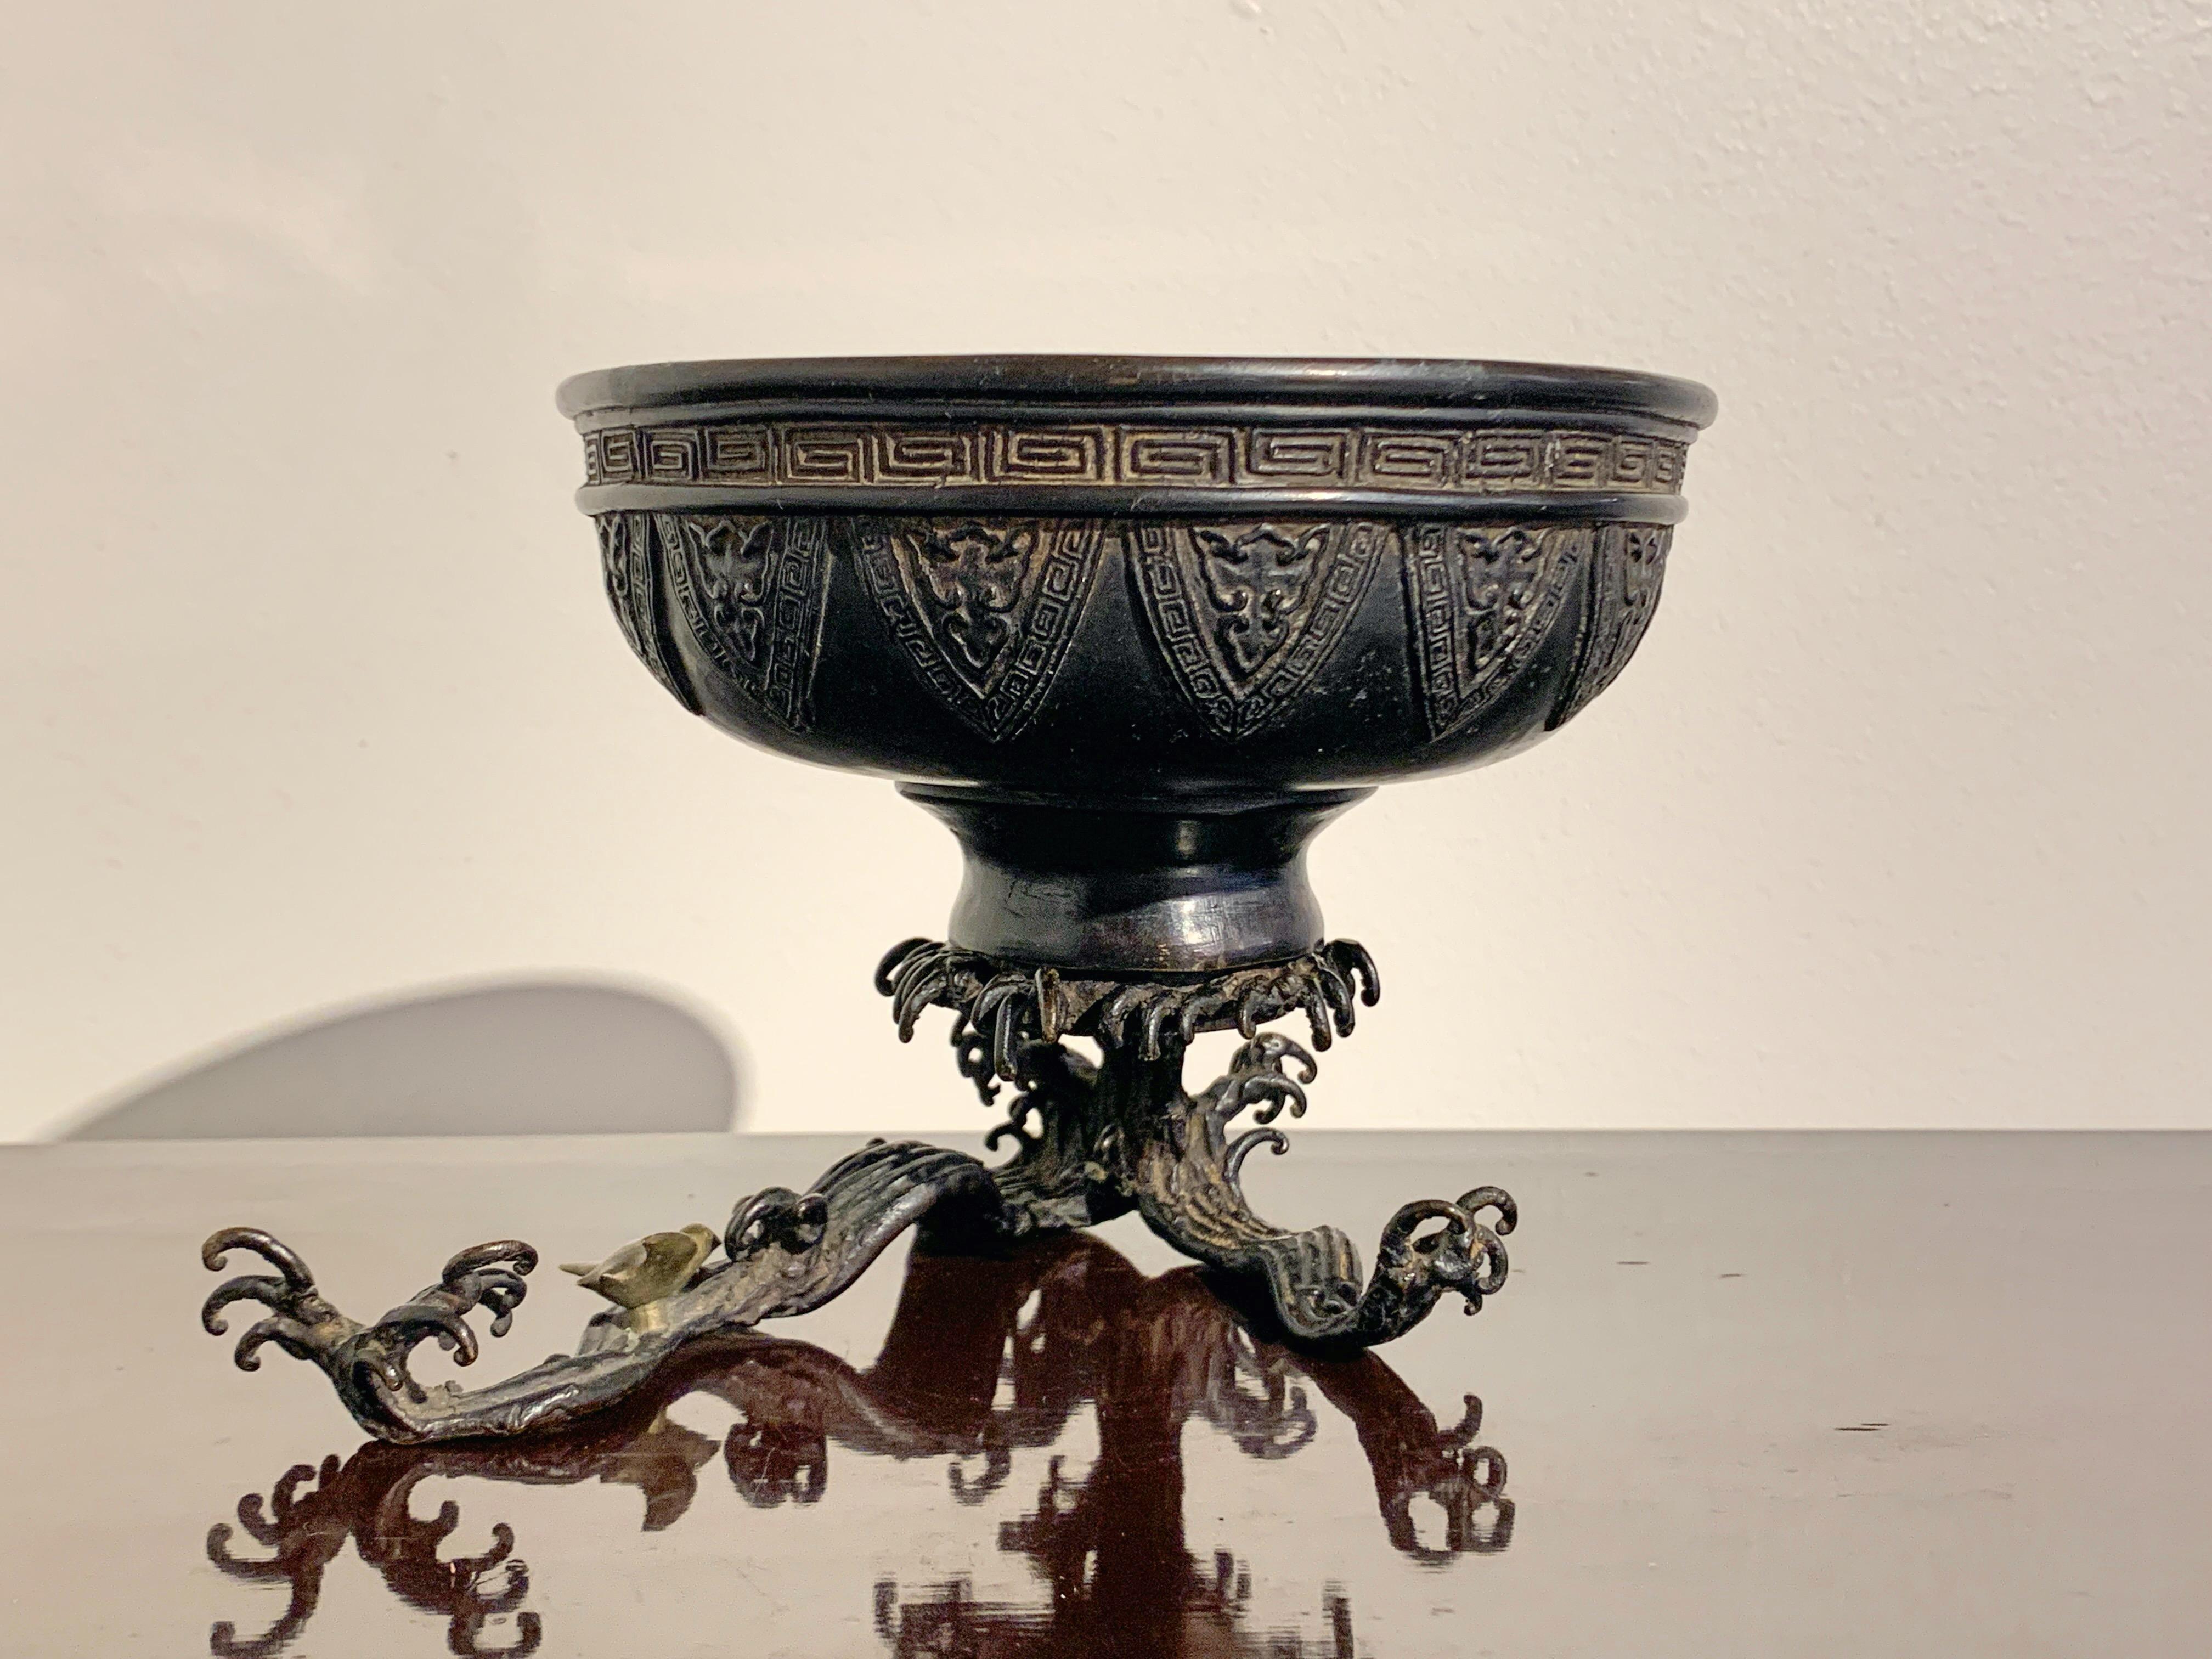 A finely cast Japanese bronze usabata, designed as an archaistic bowl being supported by crashing waves, Meiji period, late 19th century, Japan.

The usabata is an essential component for certain schools of ikebana, or Japanese flower arranging.